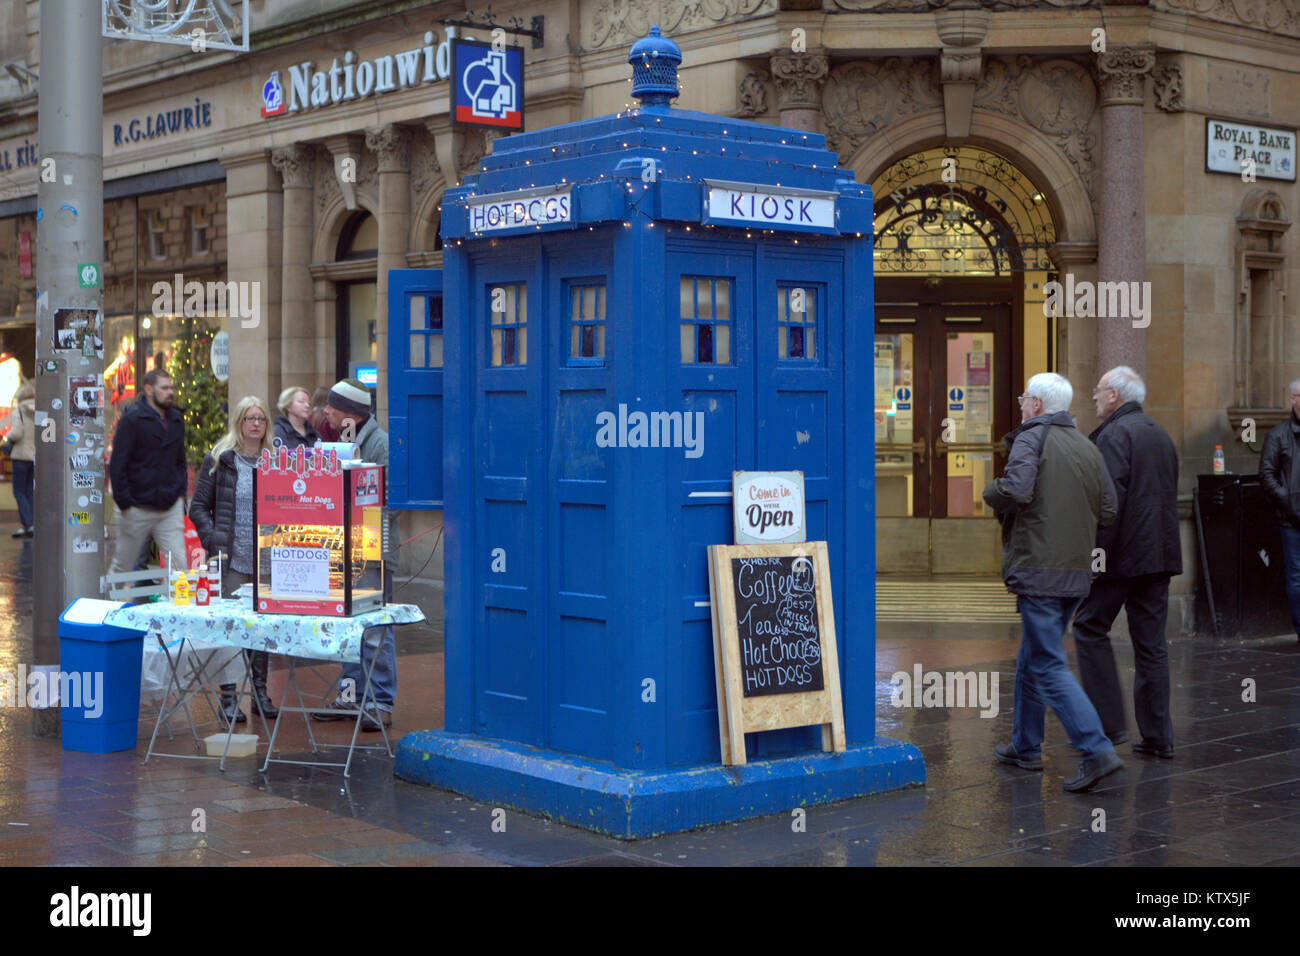 hotdog restaurant pop up police box dr who tardis site for The Ivy restaurant Glasgow celebrity hangout  opening 2017 planned on the style mile street Stock Photo